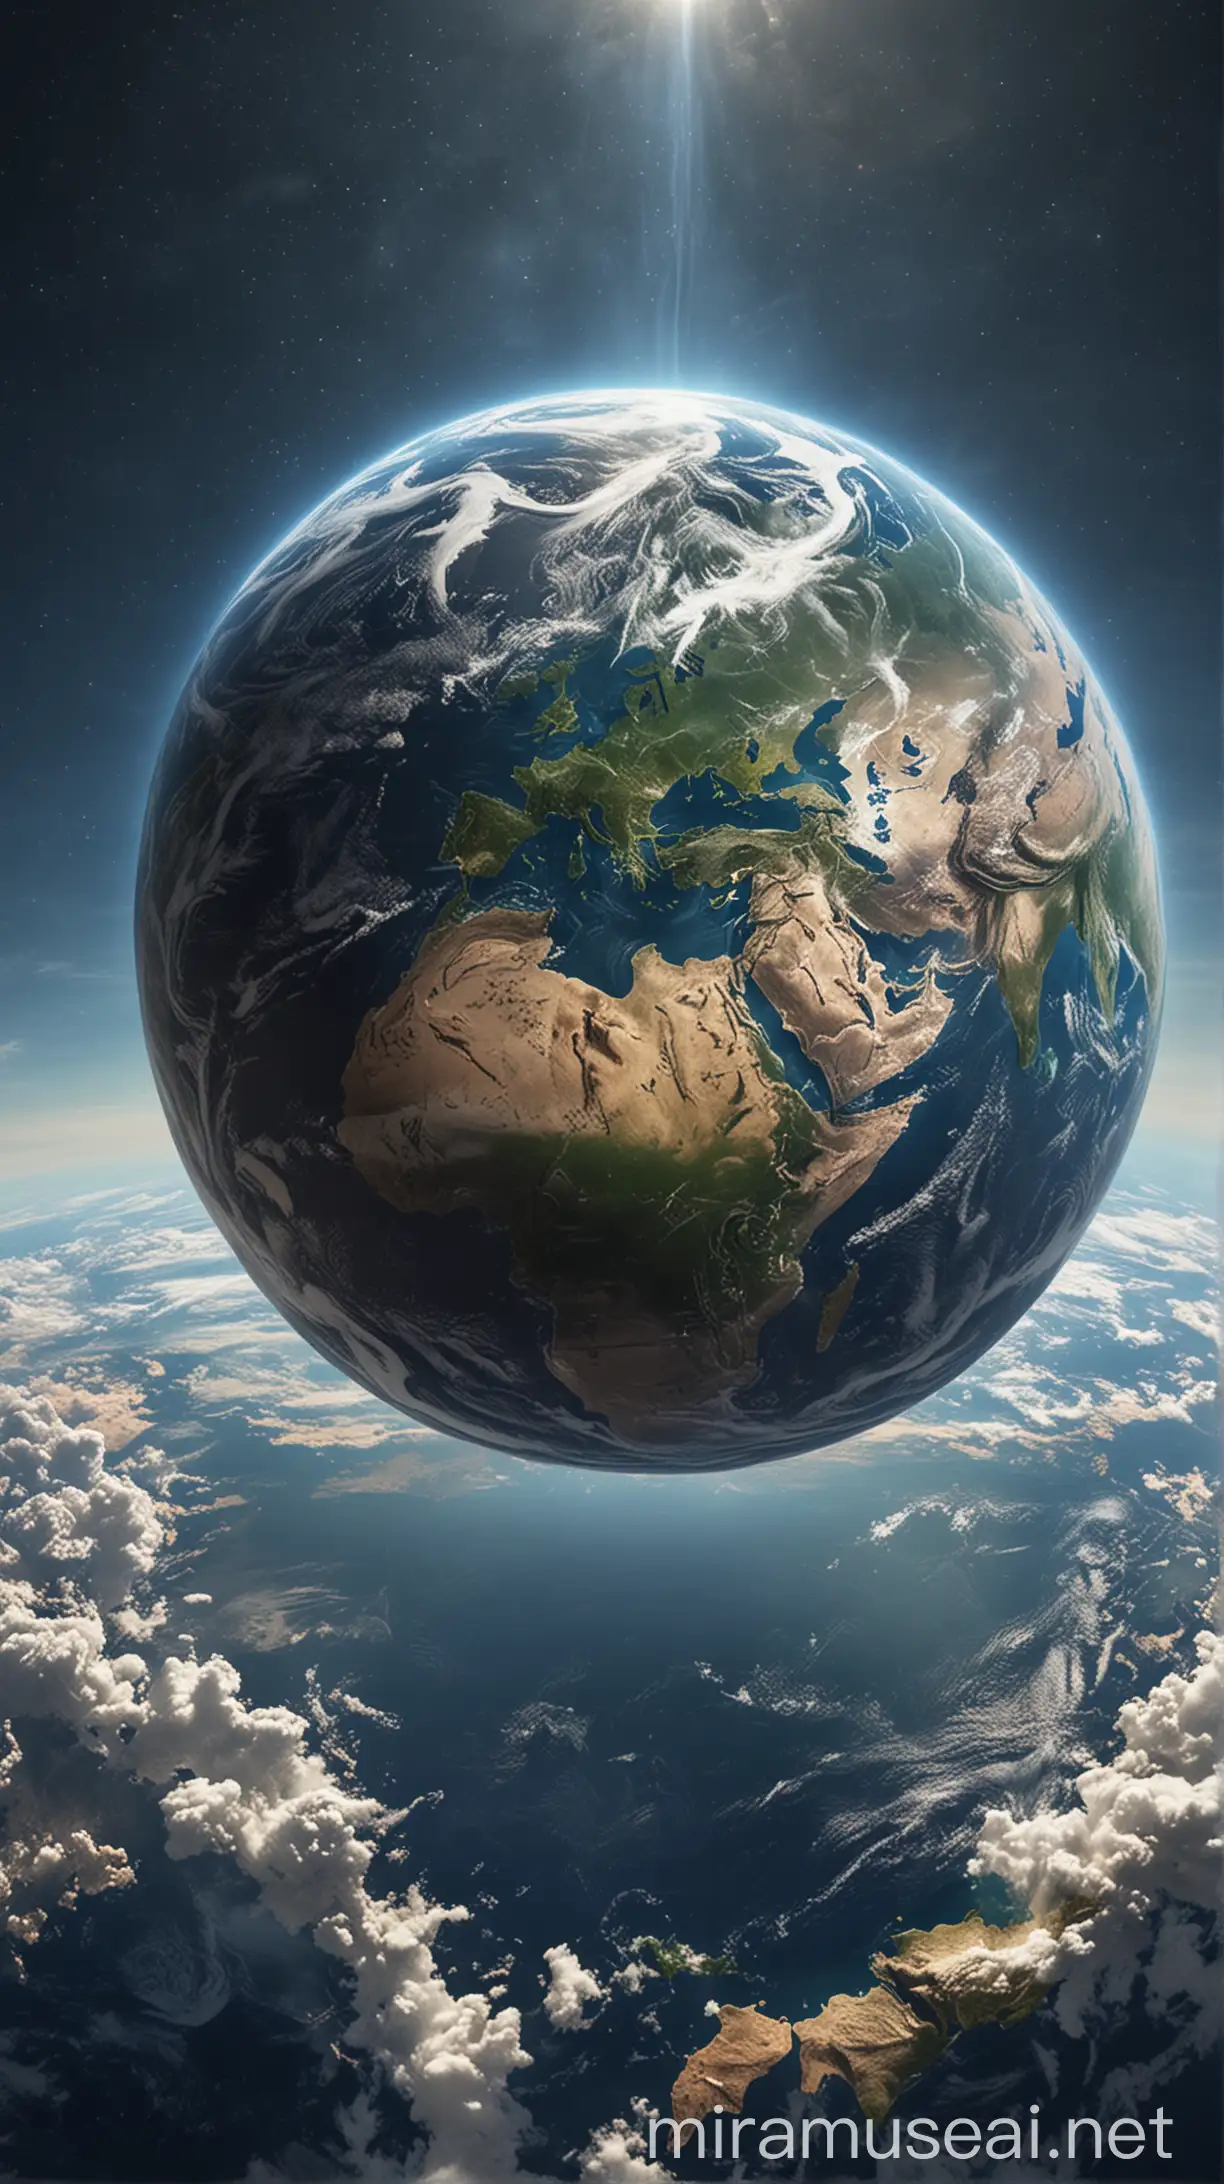 Serene and Majestic Earth Symbolizing Stability and Nurturing